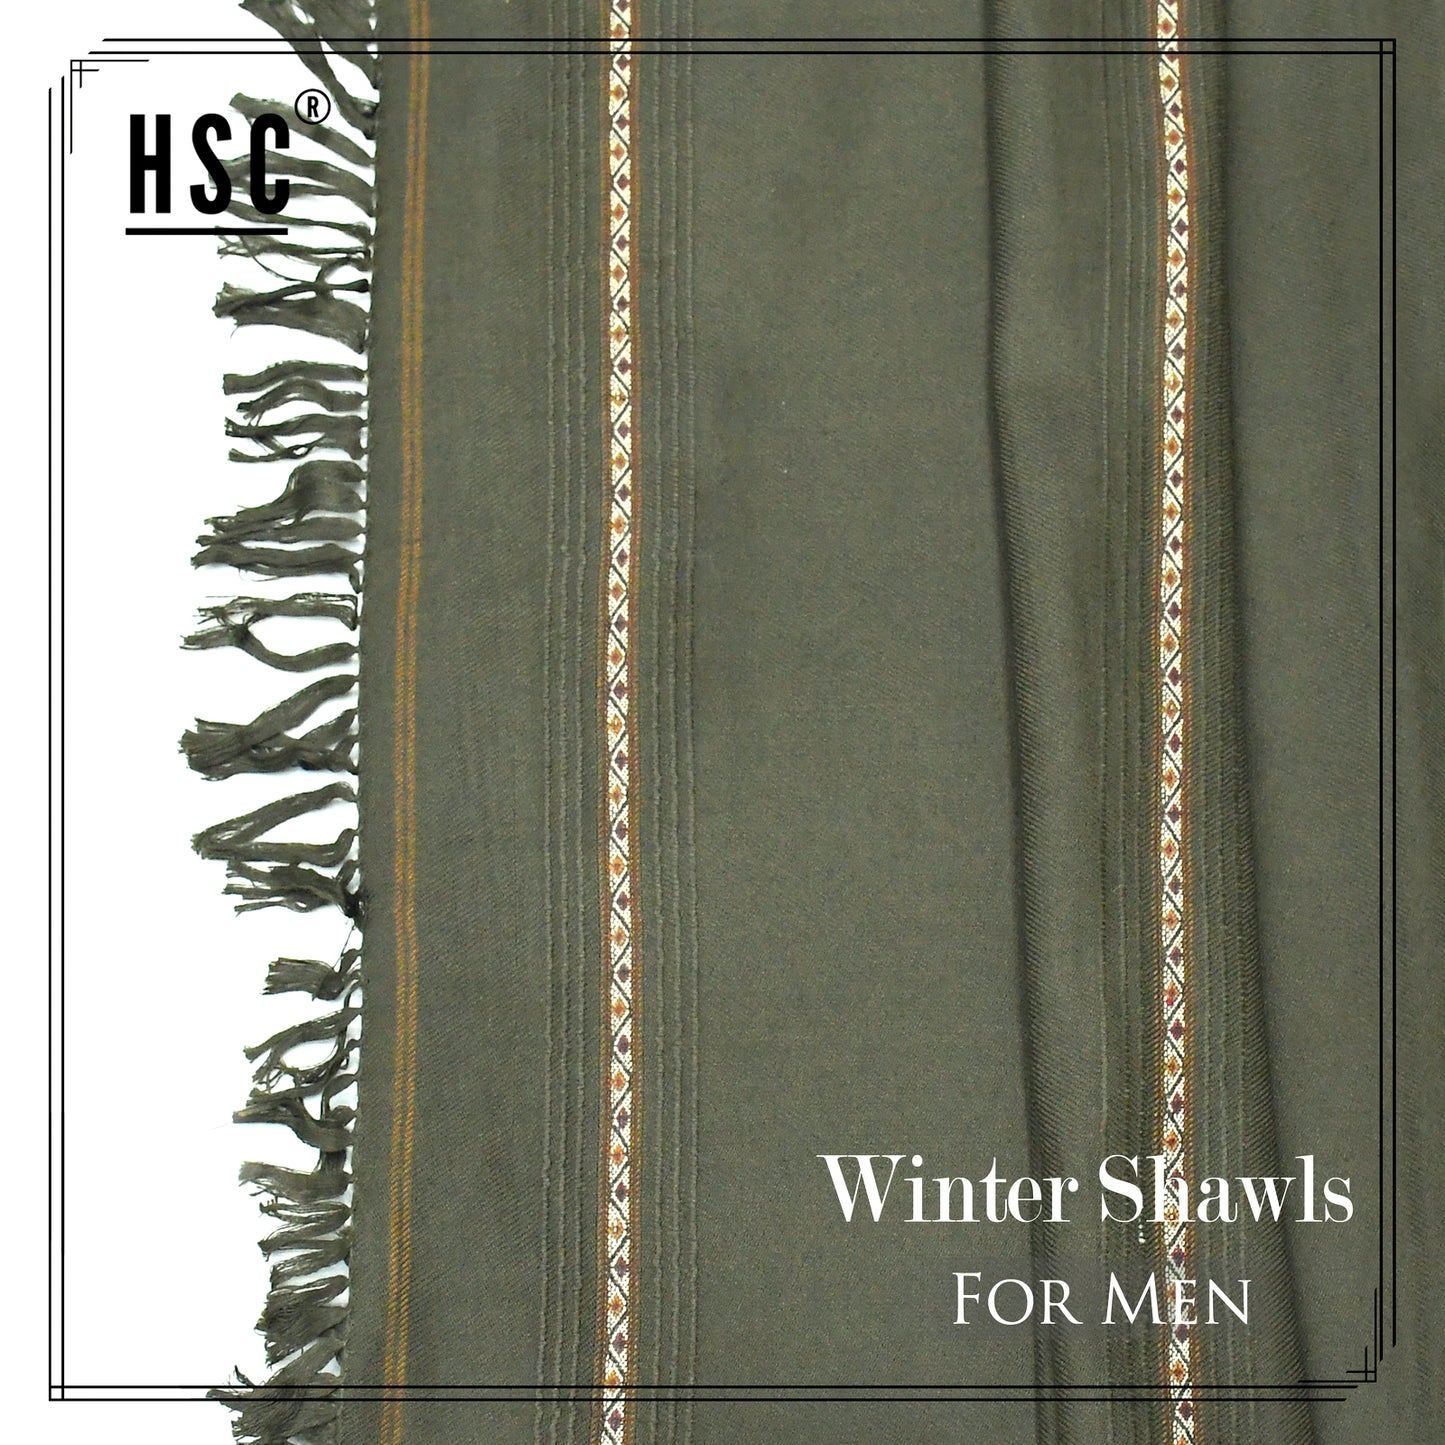 Winter Shawl For Men - WSW3